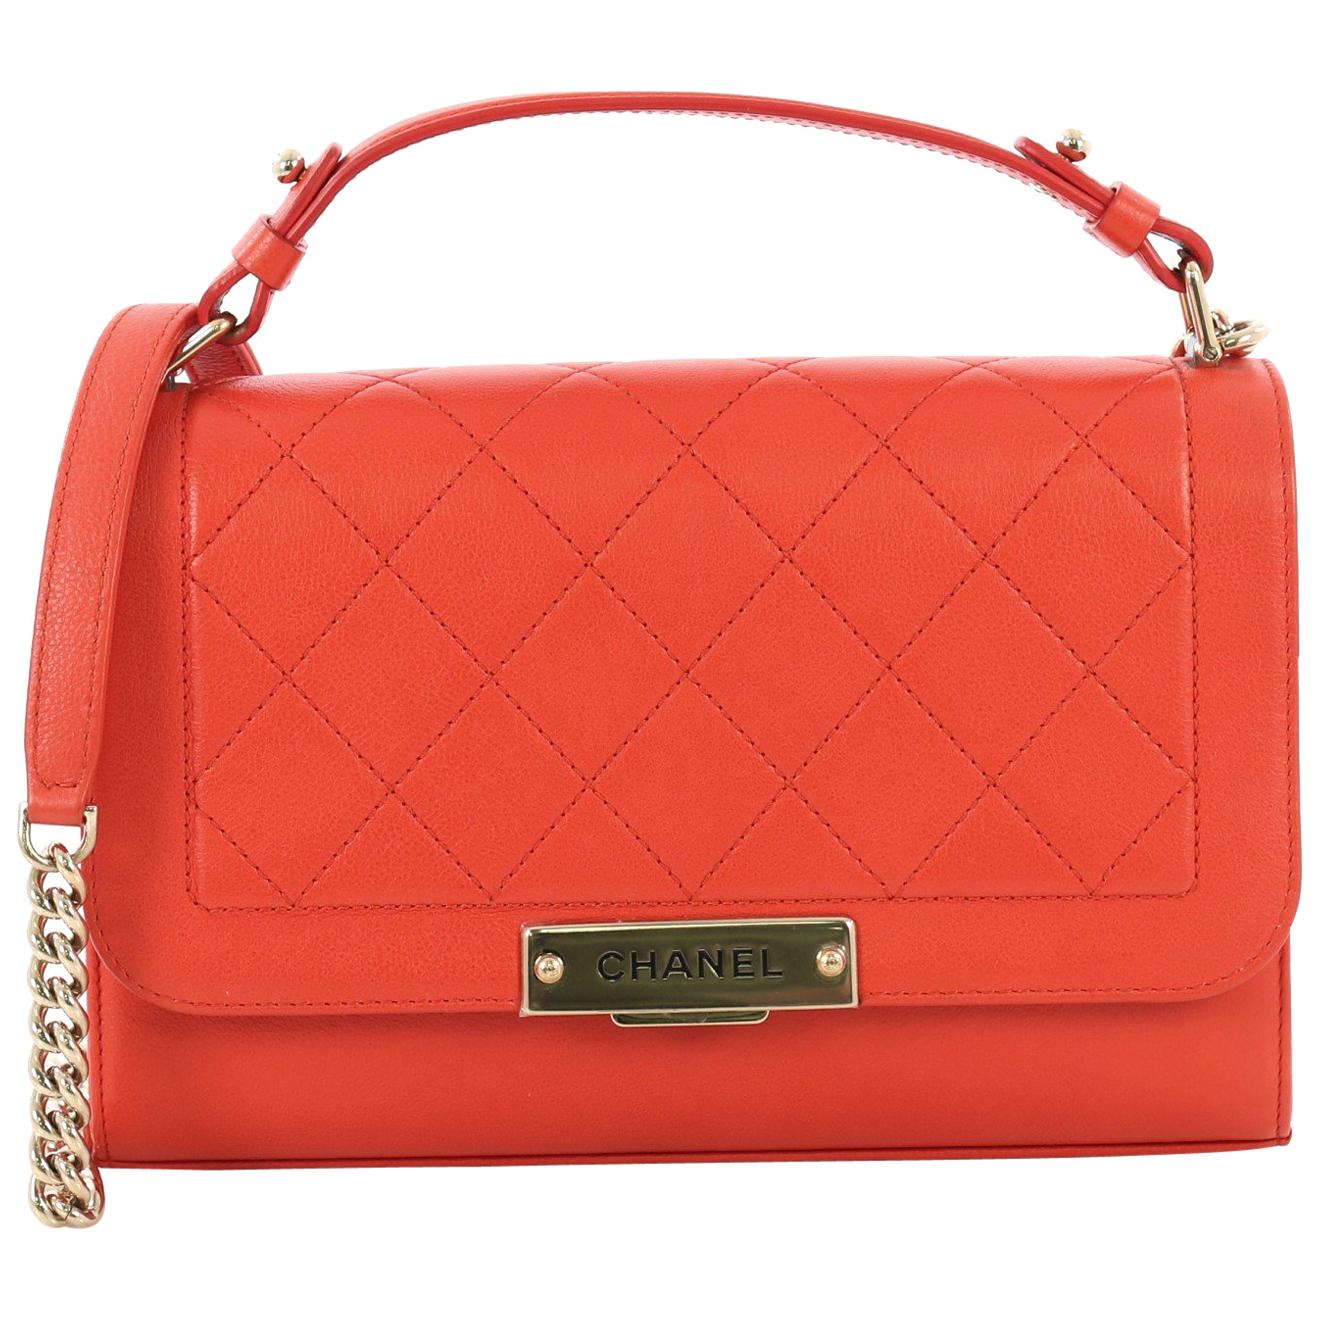 This Chanel Label Click Flap Bag Quilted Calfskin Medium, crafted from red quilted calfskin, features leather top handle, chain link strap, and gold-tone hardware. Its push-lock closure opens to a beige fabric interior with side zip pocket. Hologram